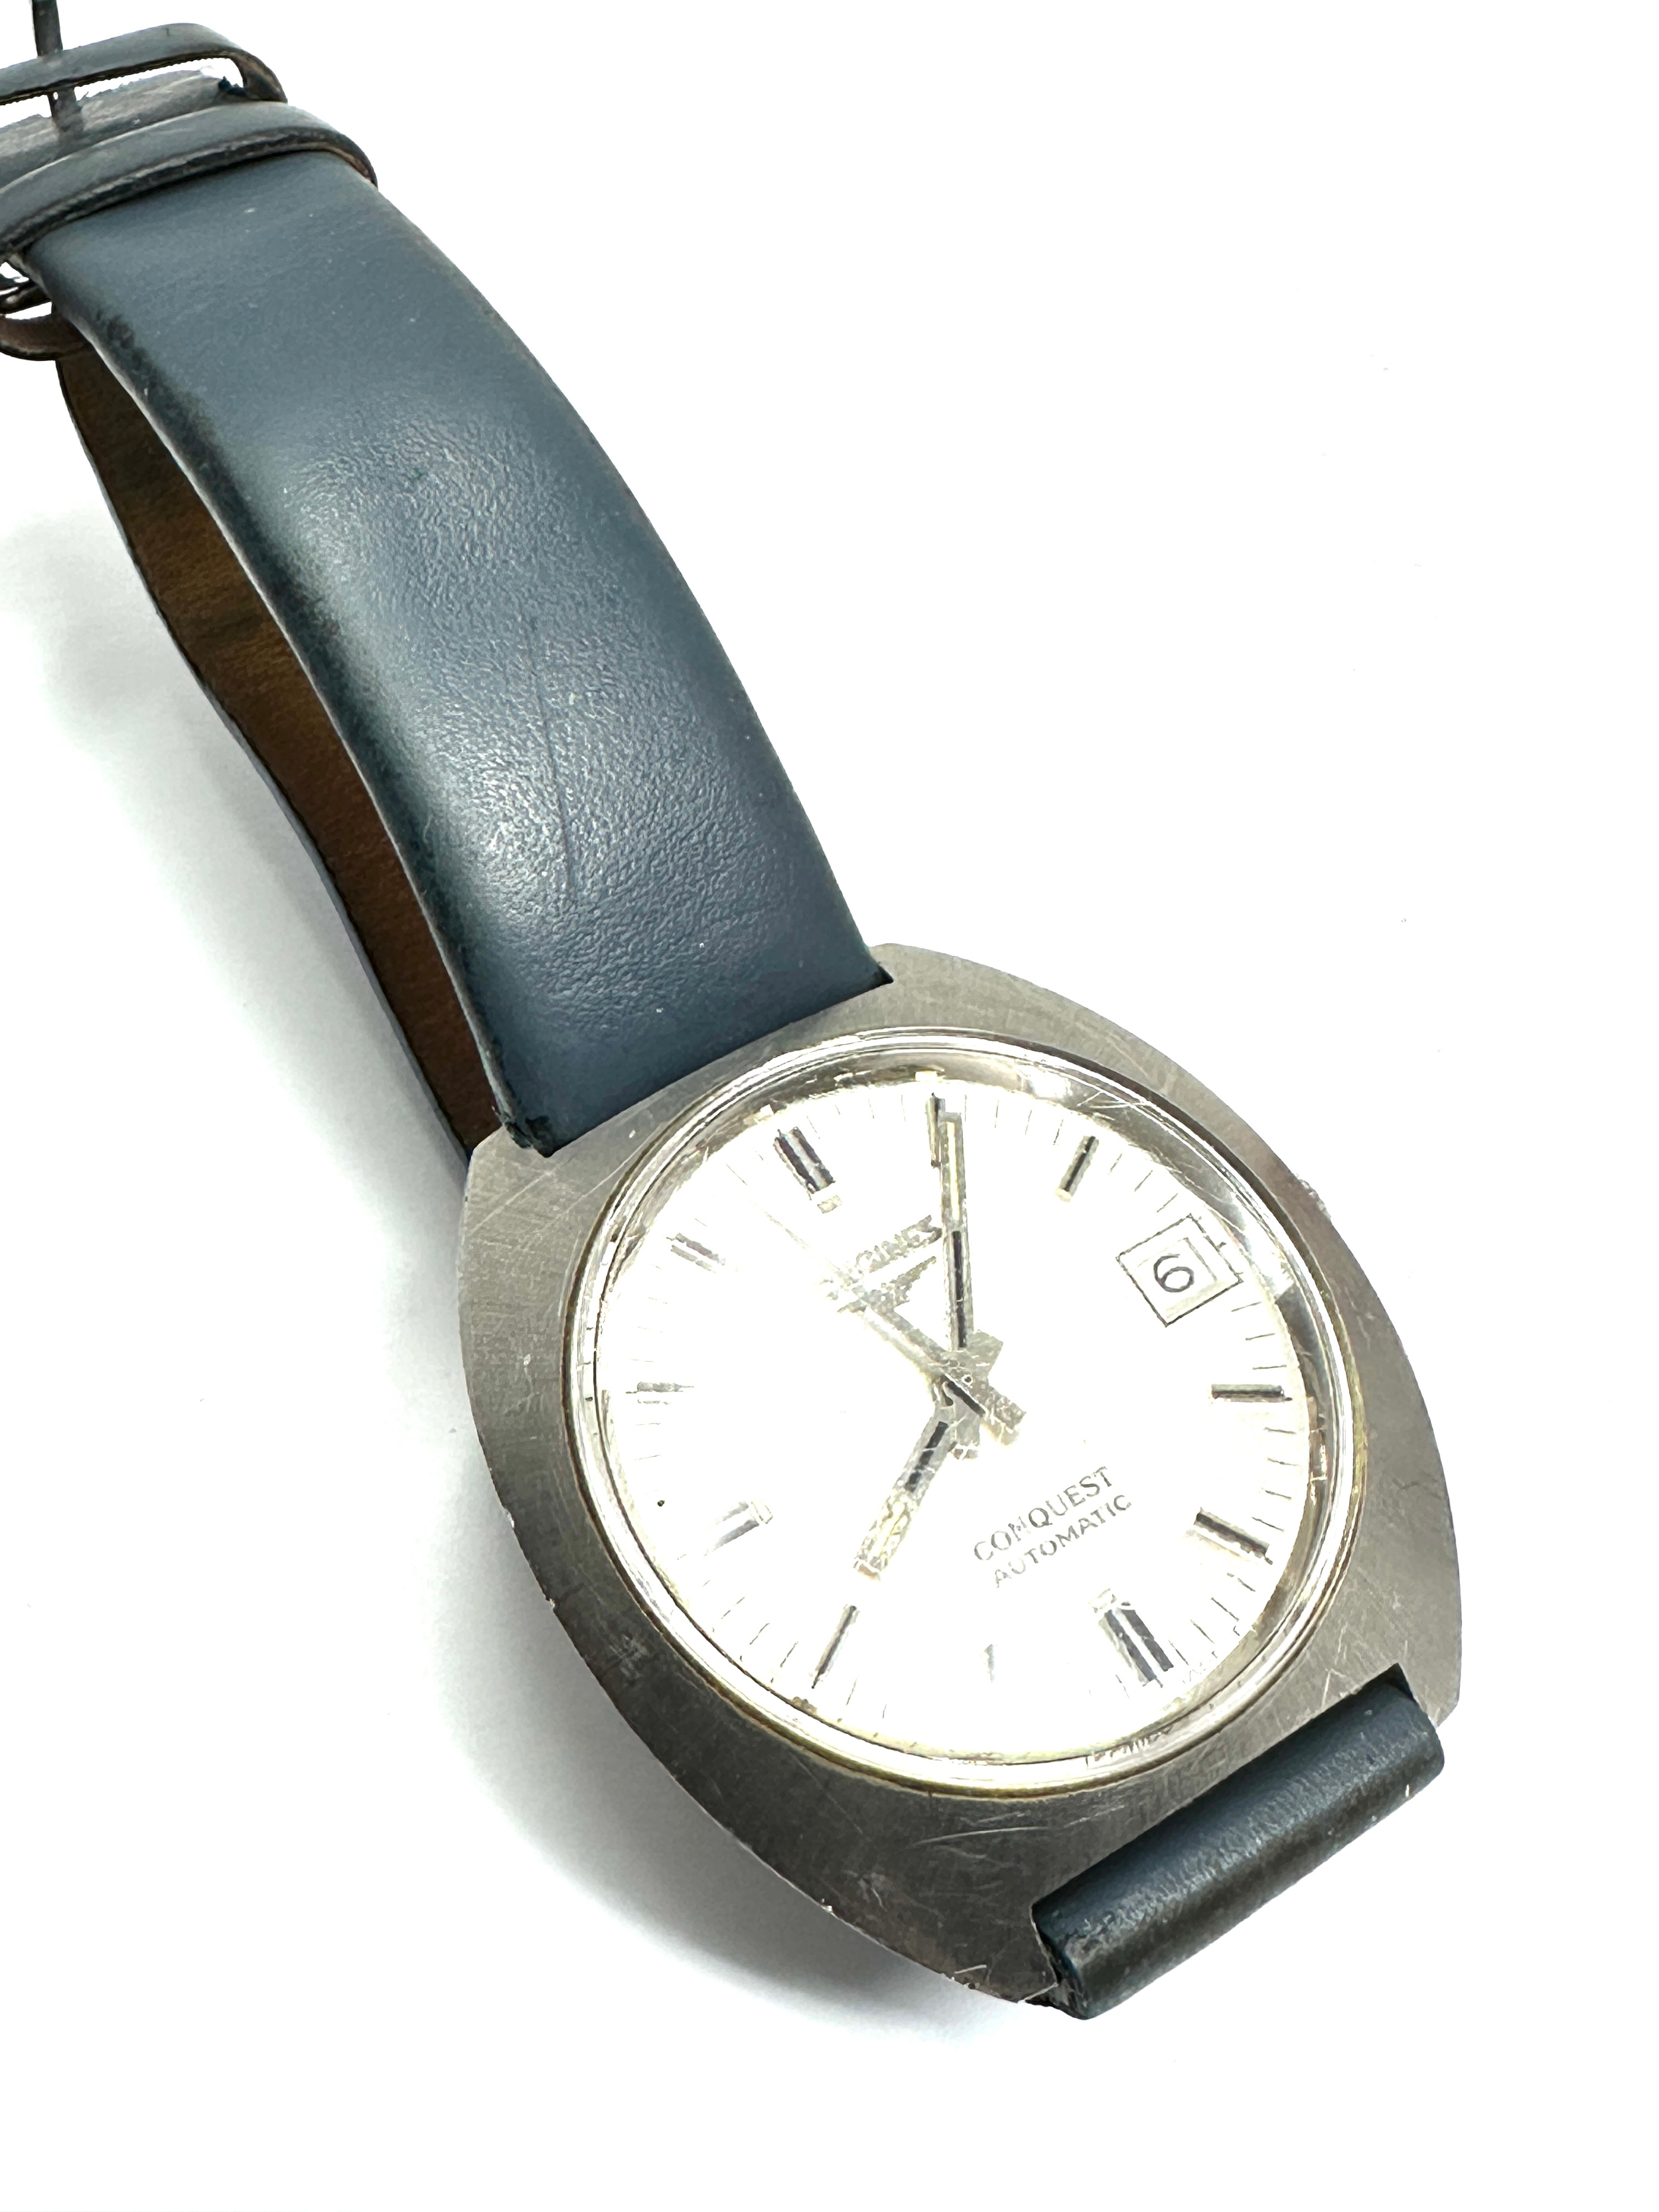 Vintage gents Longines conquest automatic wristwatch the watch is ticking when shaken but stops